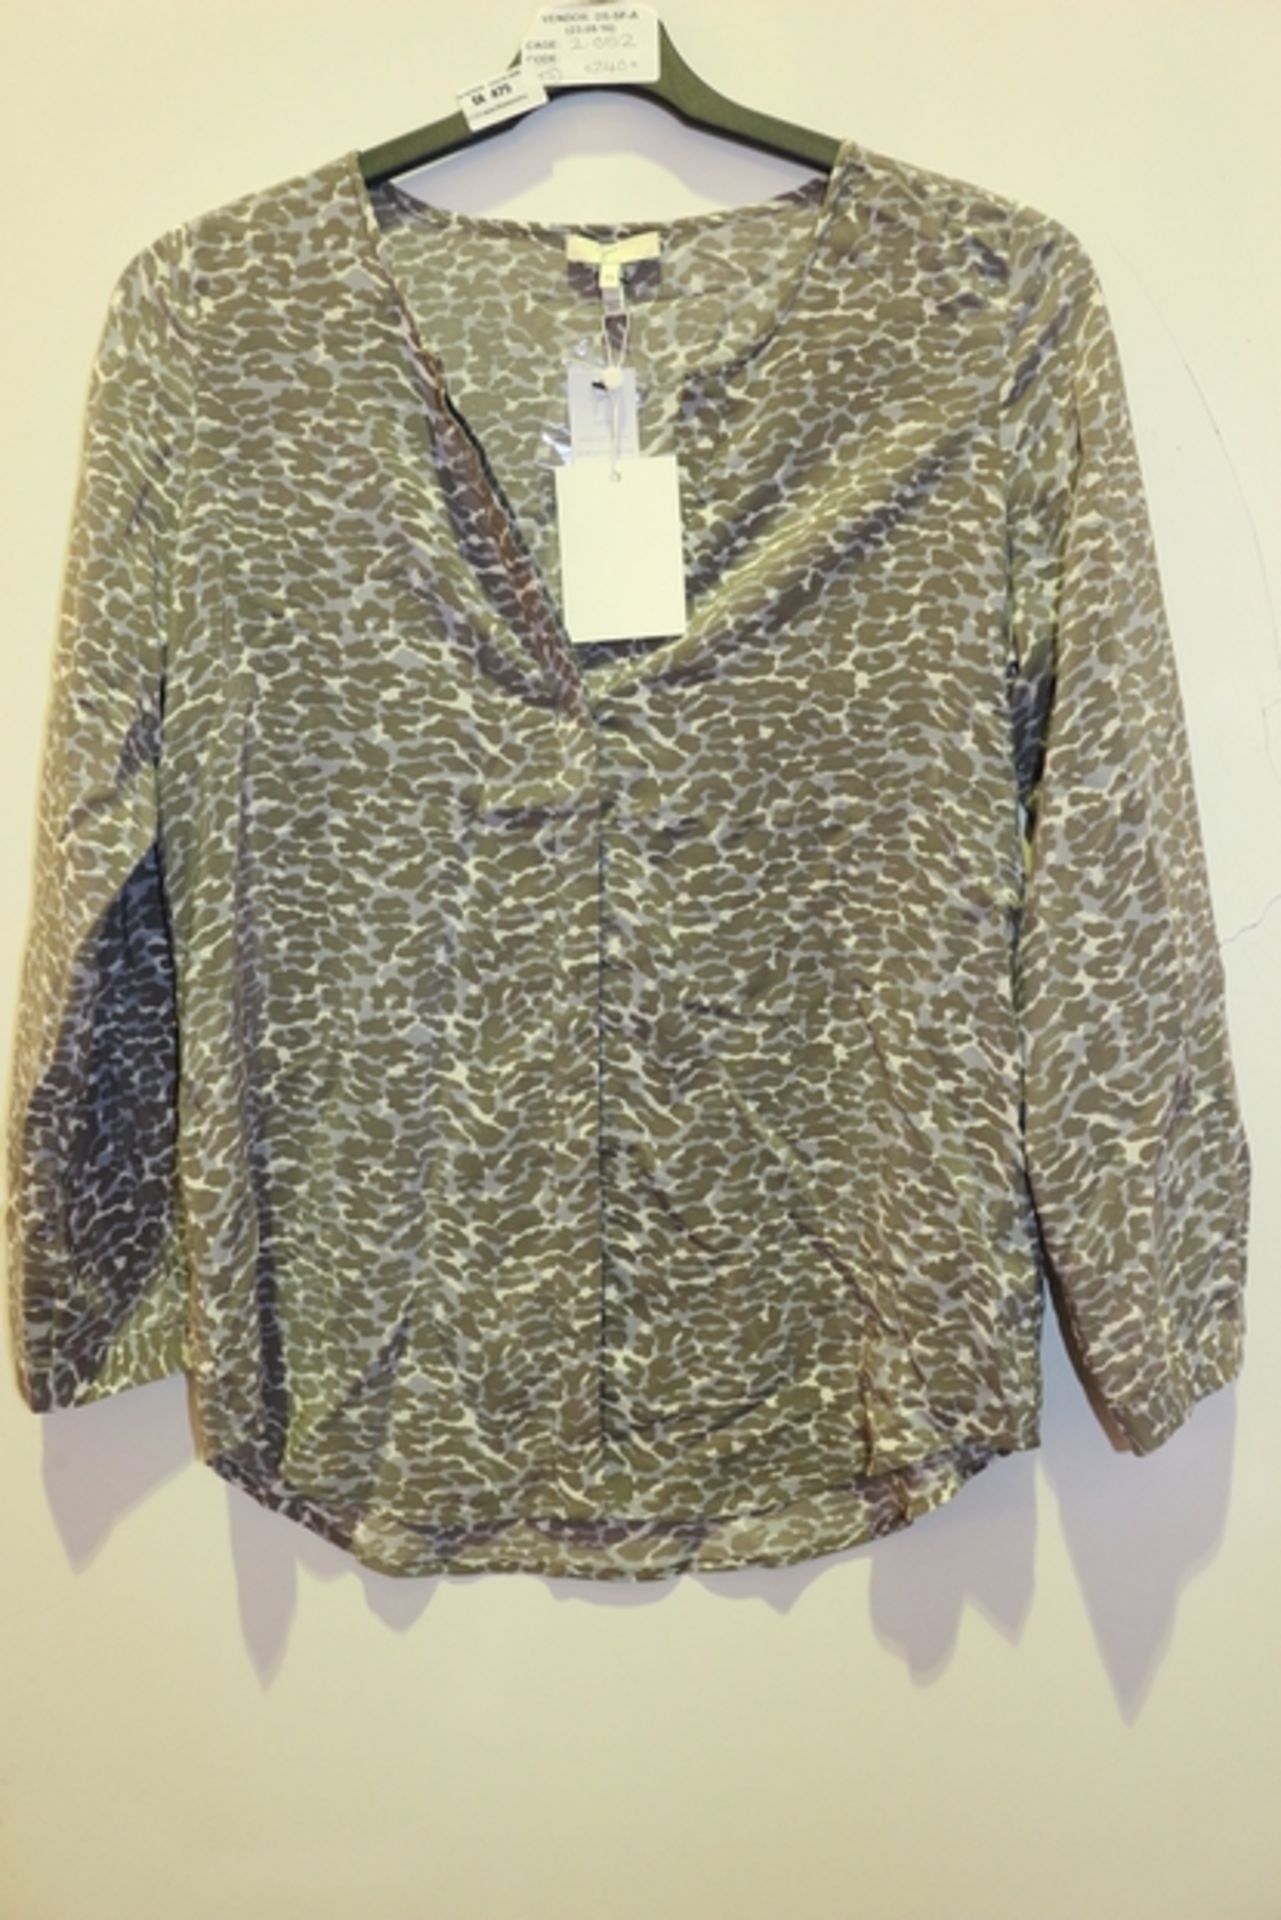 1X BRAND NEW JOIE LADIES TOP SIZE LARGE RRP £200 (DS-SF-A0 (2.052)